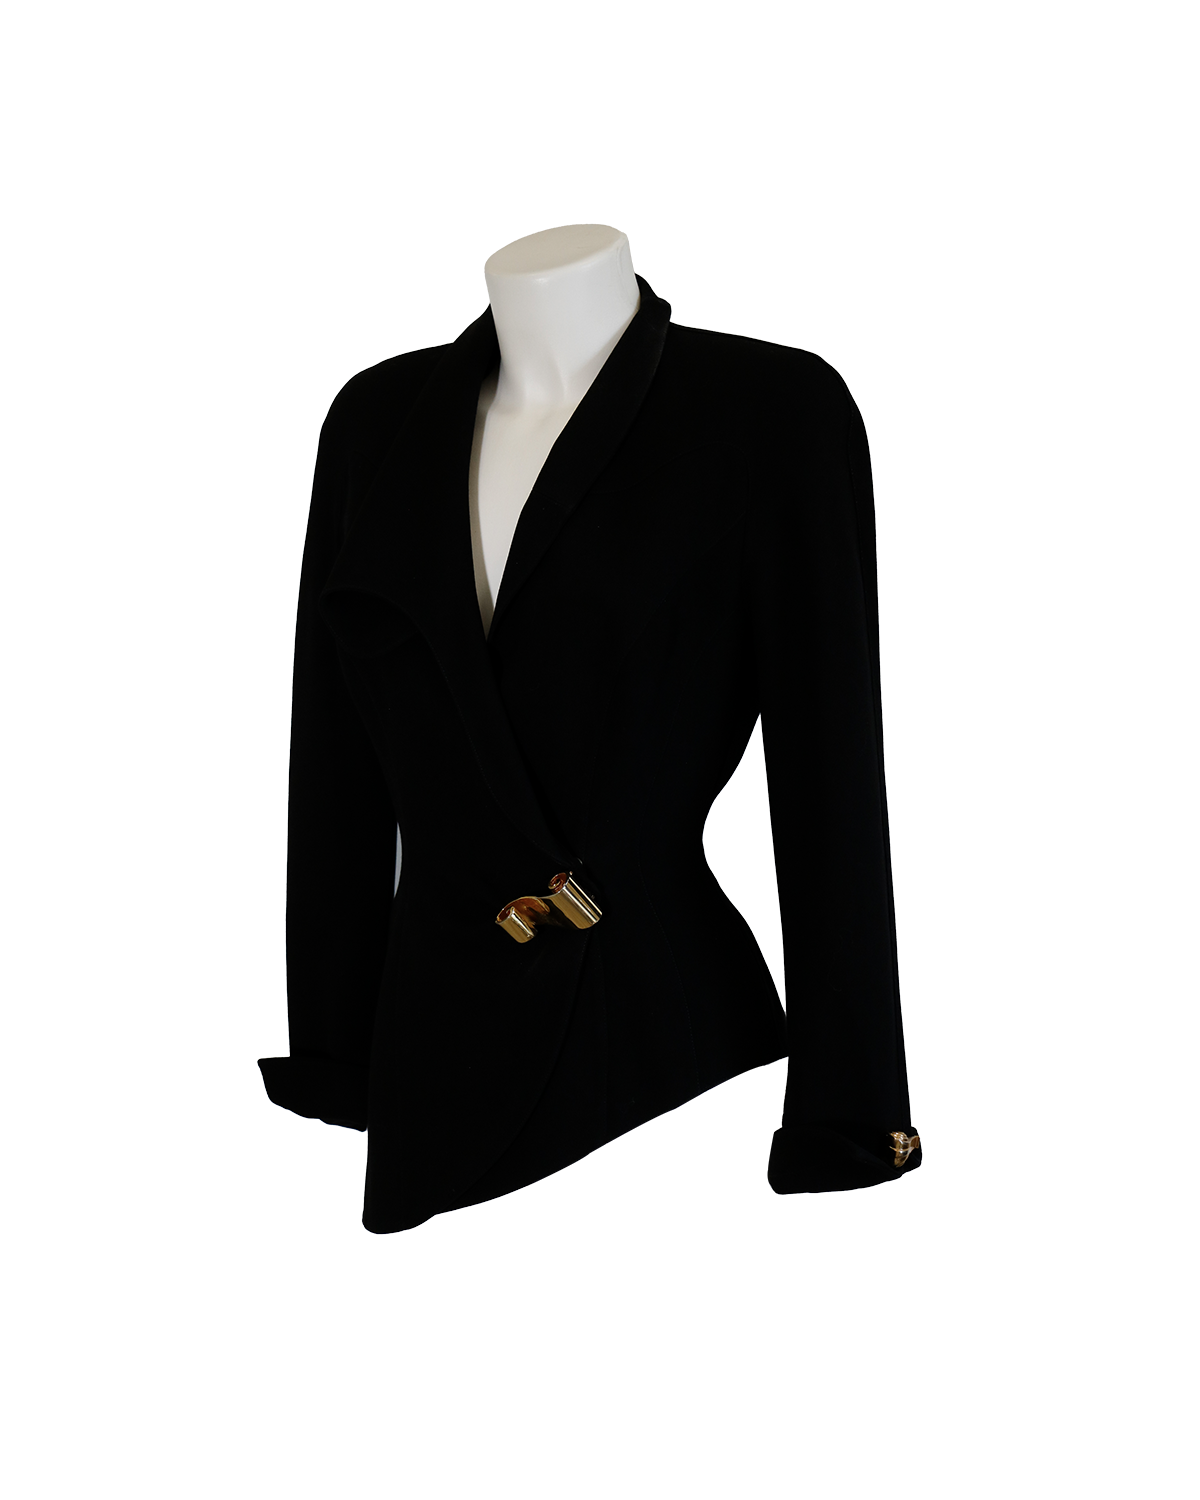 Thierry Mugler Black Jacket from 1980s